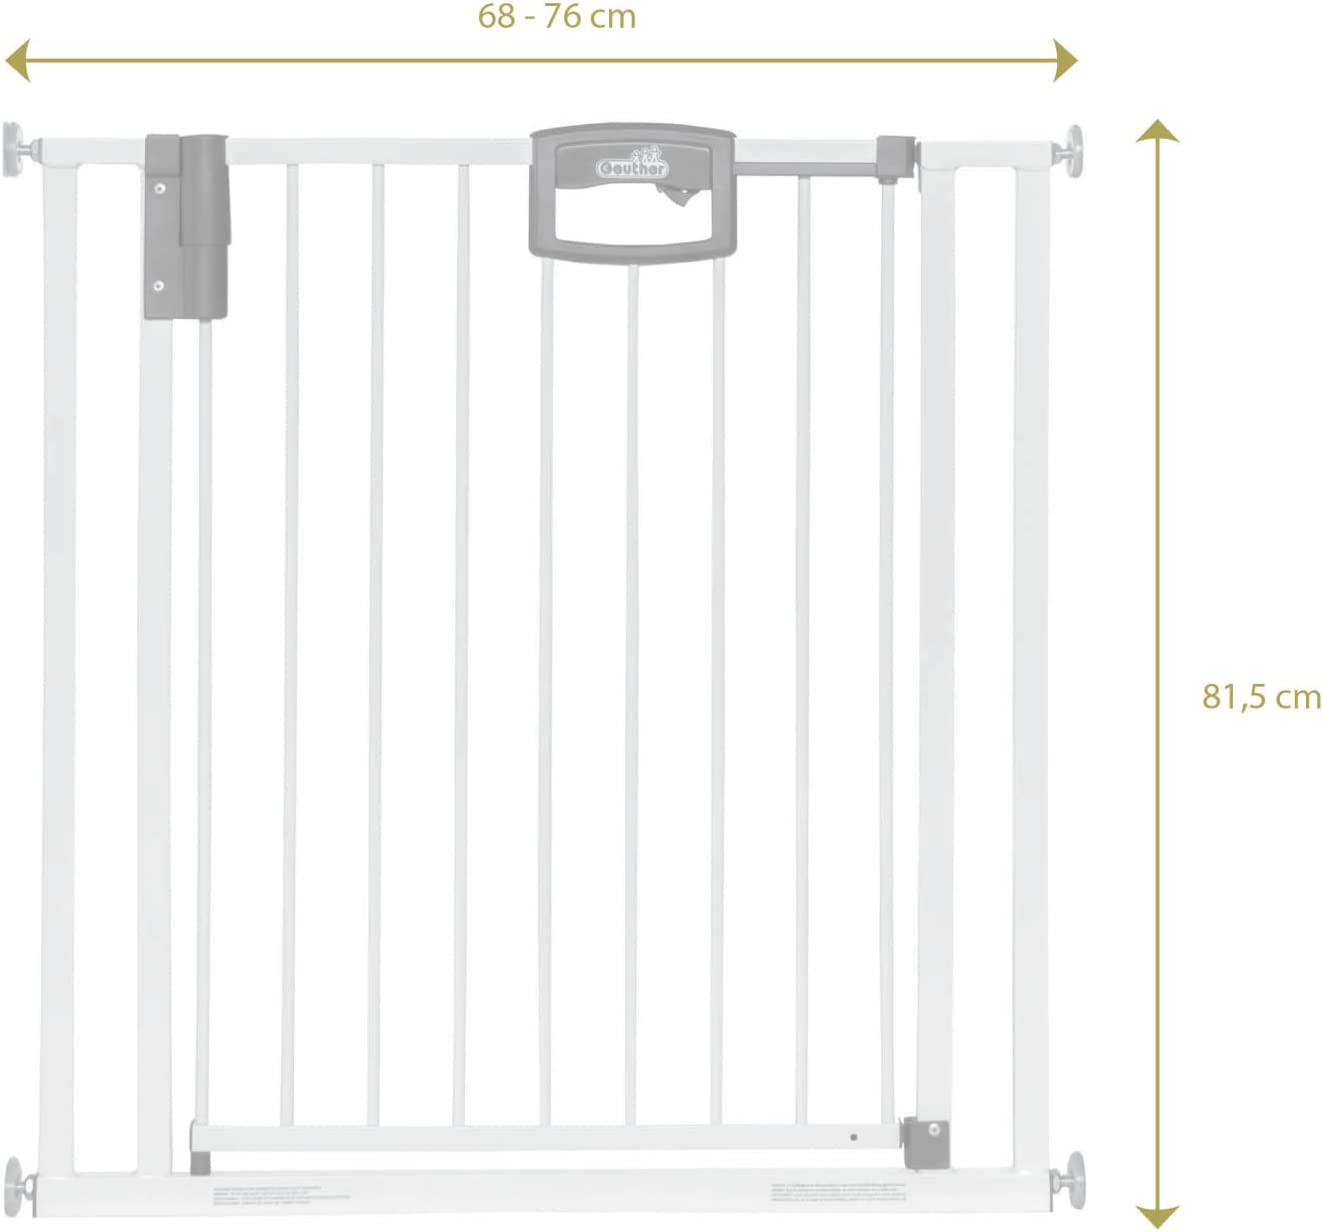 Geuther Stair-Safety Gate | Adjustment 68 cm – 76 cm